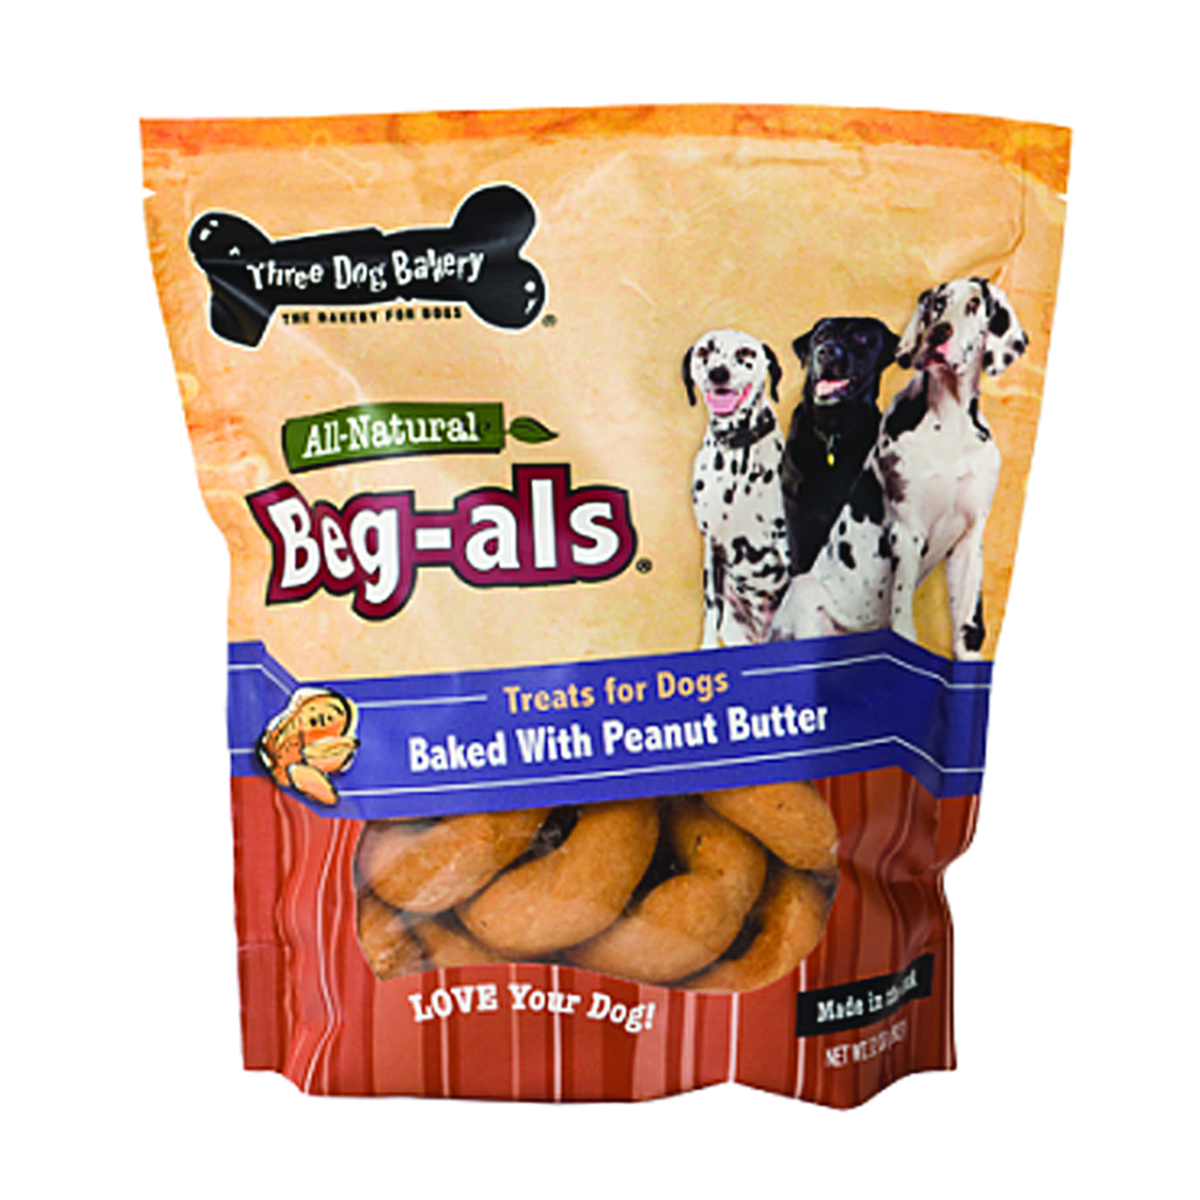 BEG-ALS TREATS FOR DOGS